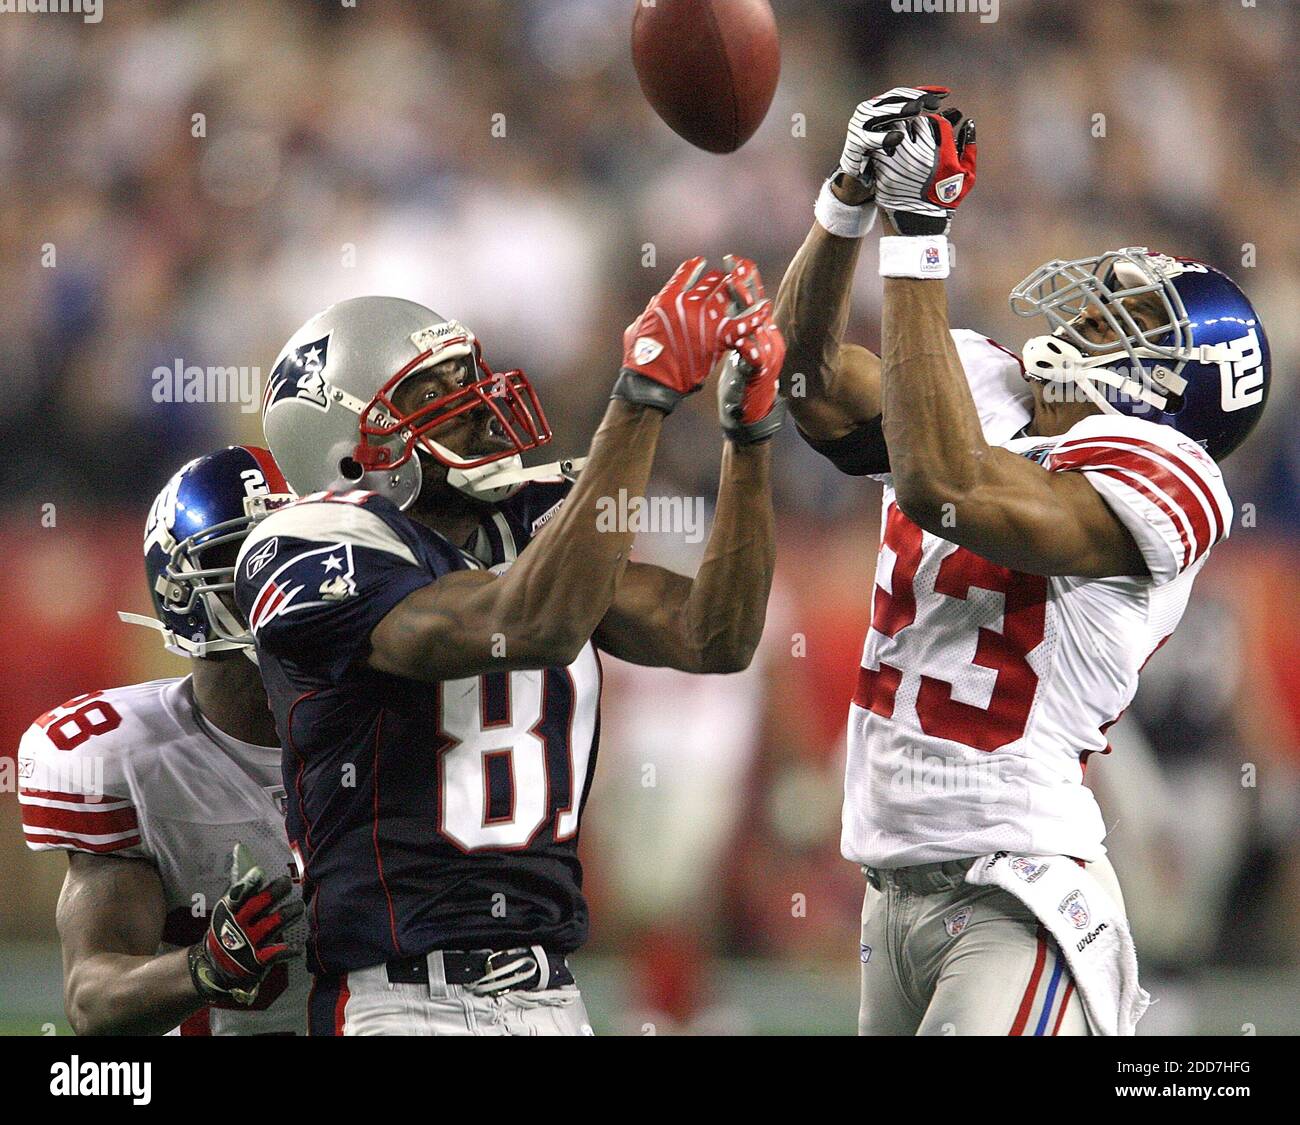 The New England Patriots' Randy Moss (81) can't pull in a pass against the  New York Giants' Corey Webster (23) in a 17-14 Giants victory in Super Bowl  XLII at University of